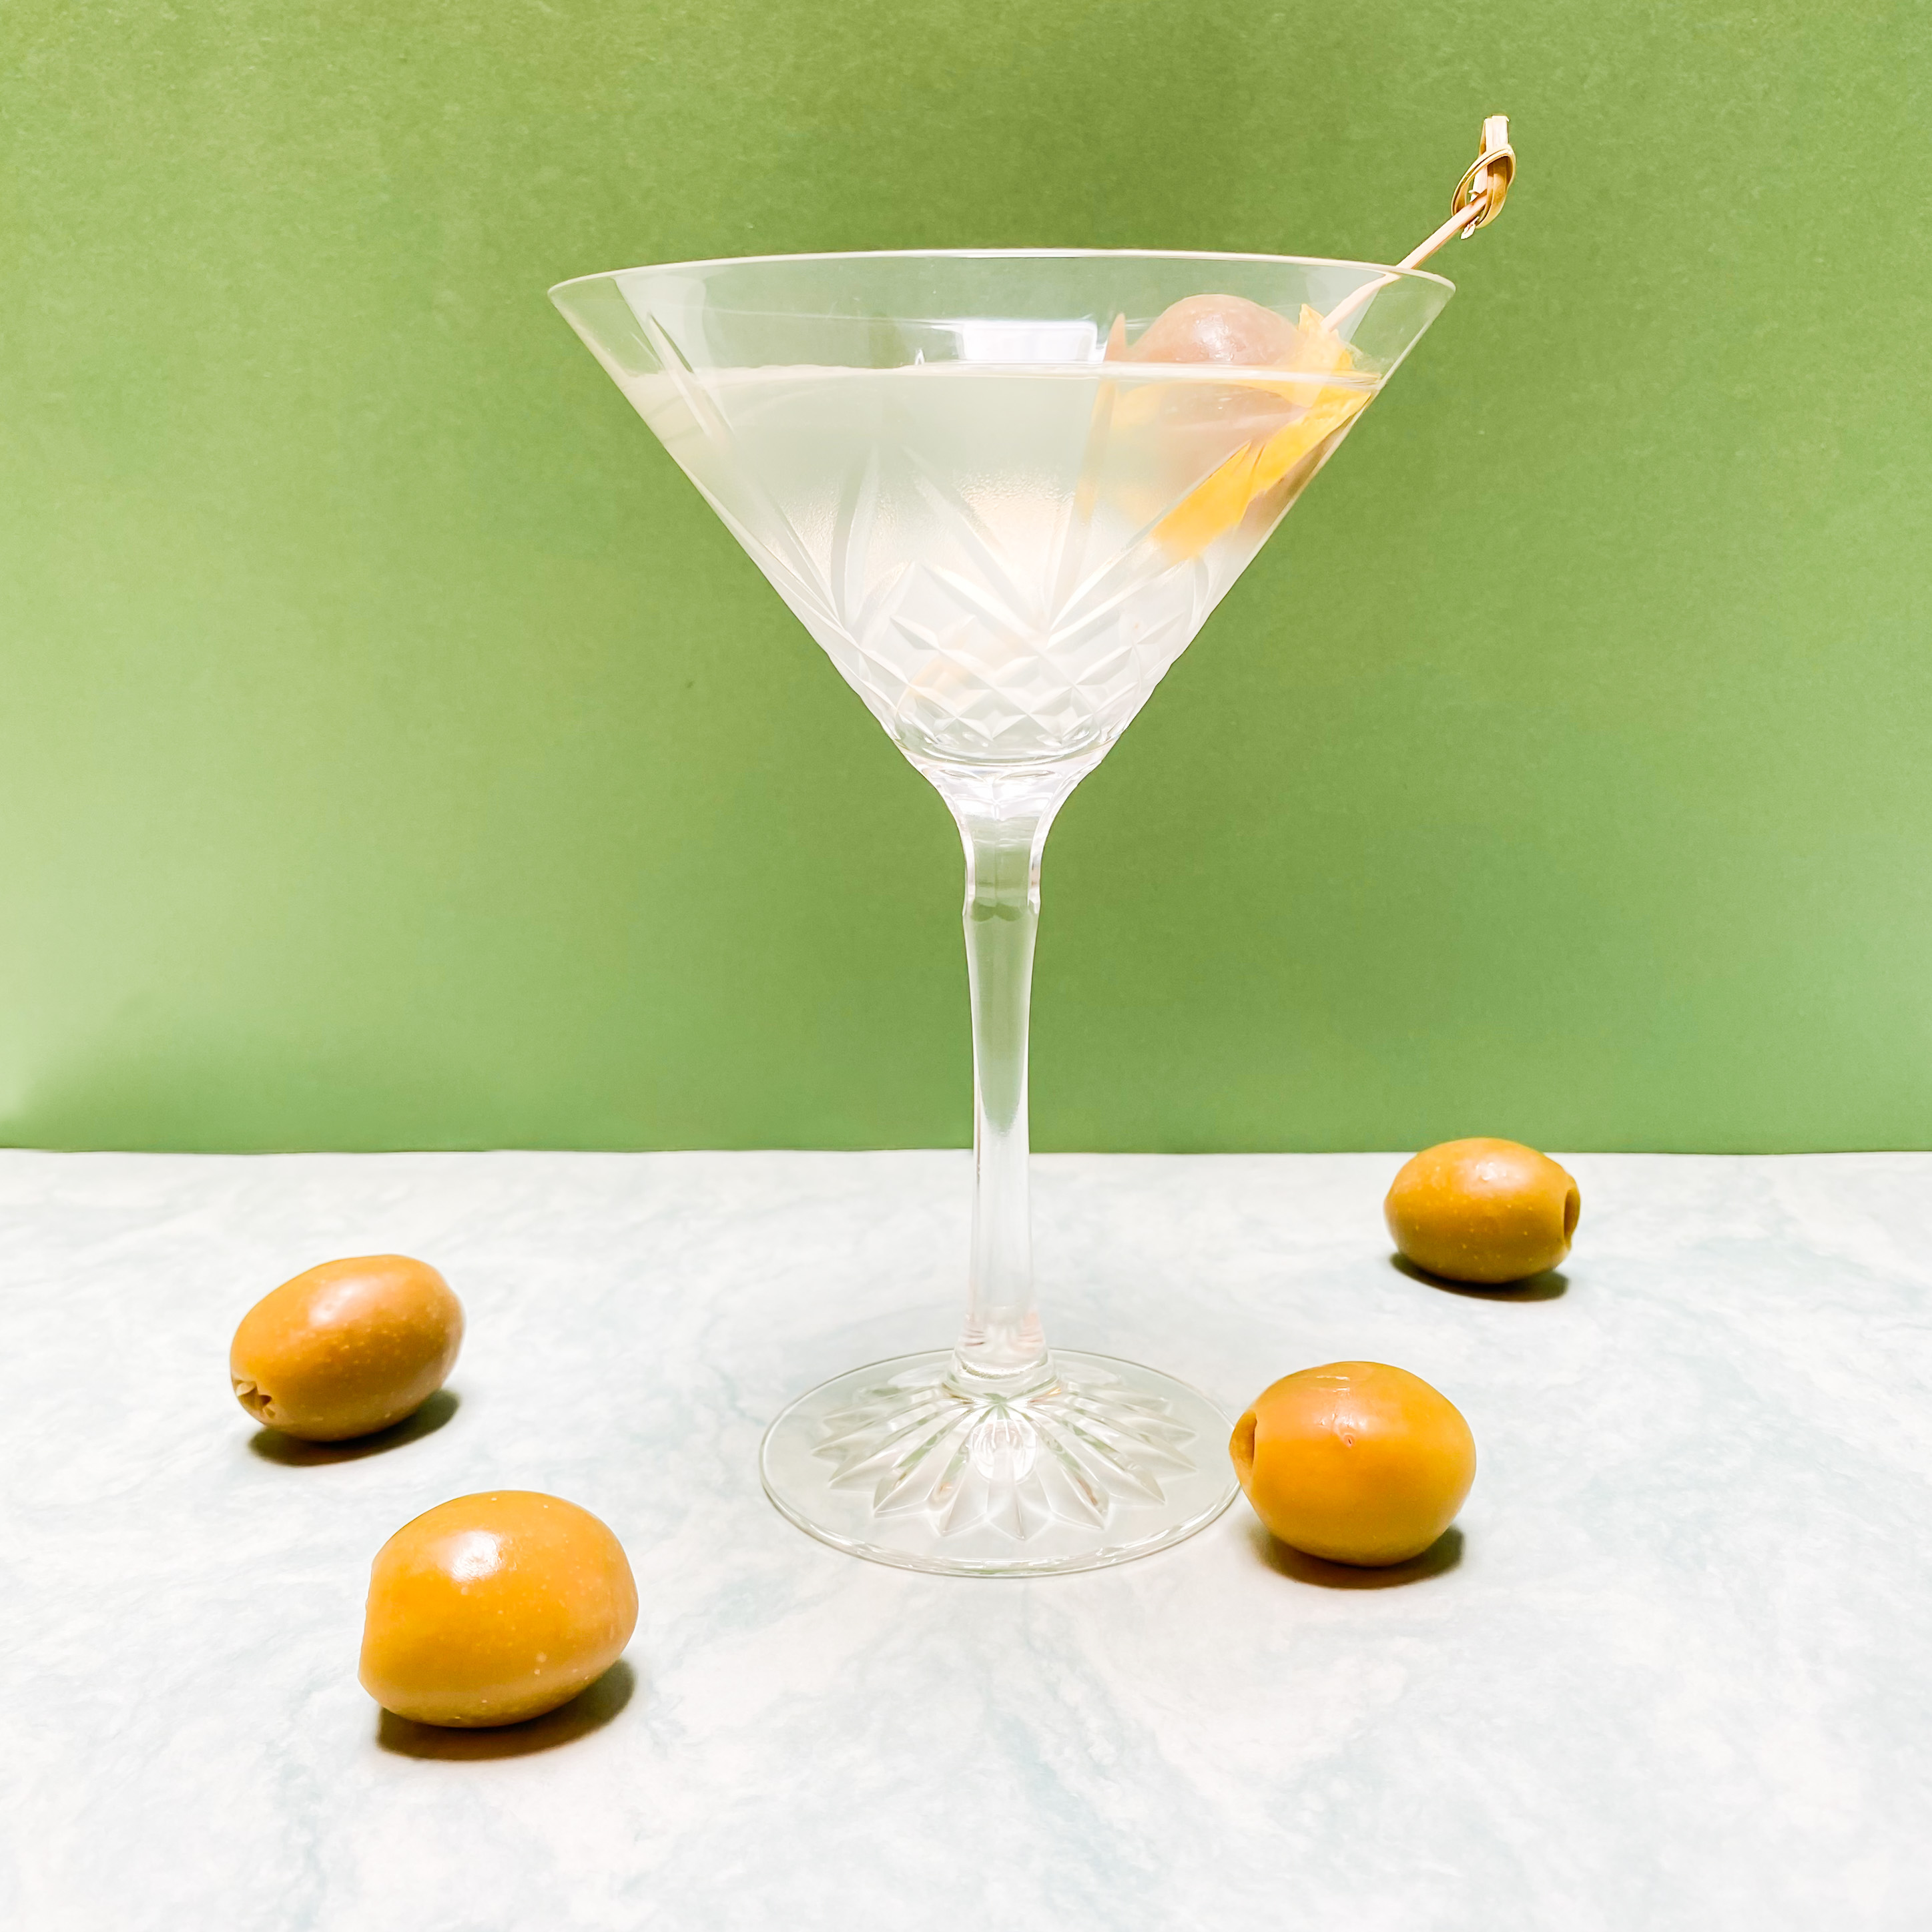 A clear drink in a martini glass pictured against a green background. A few olives are placed around the base of the glass.